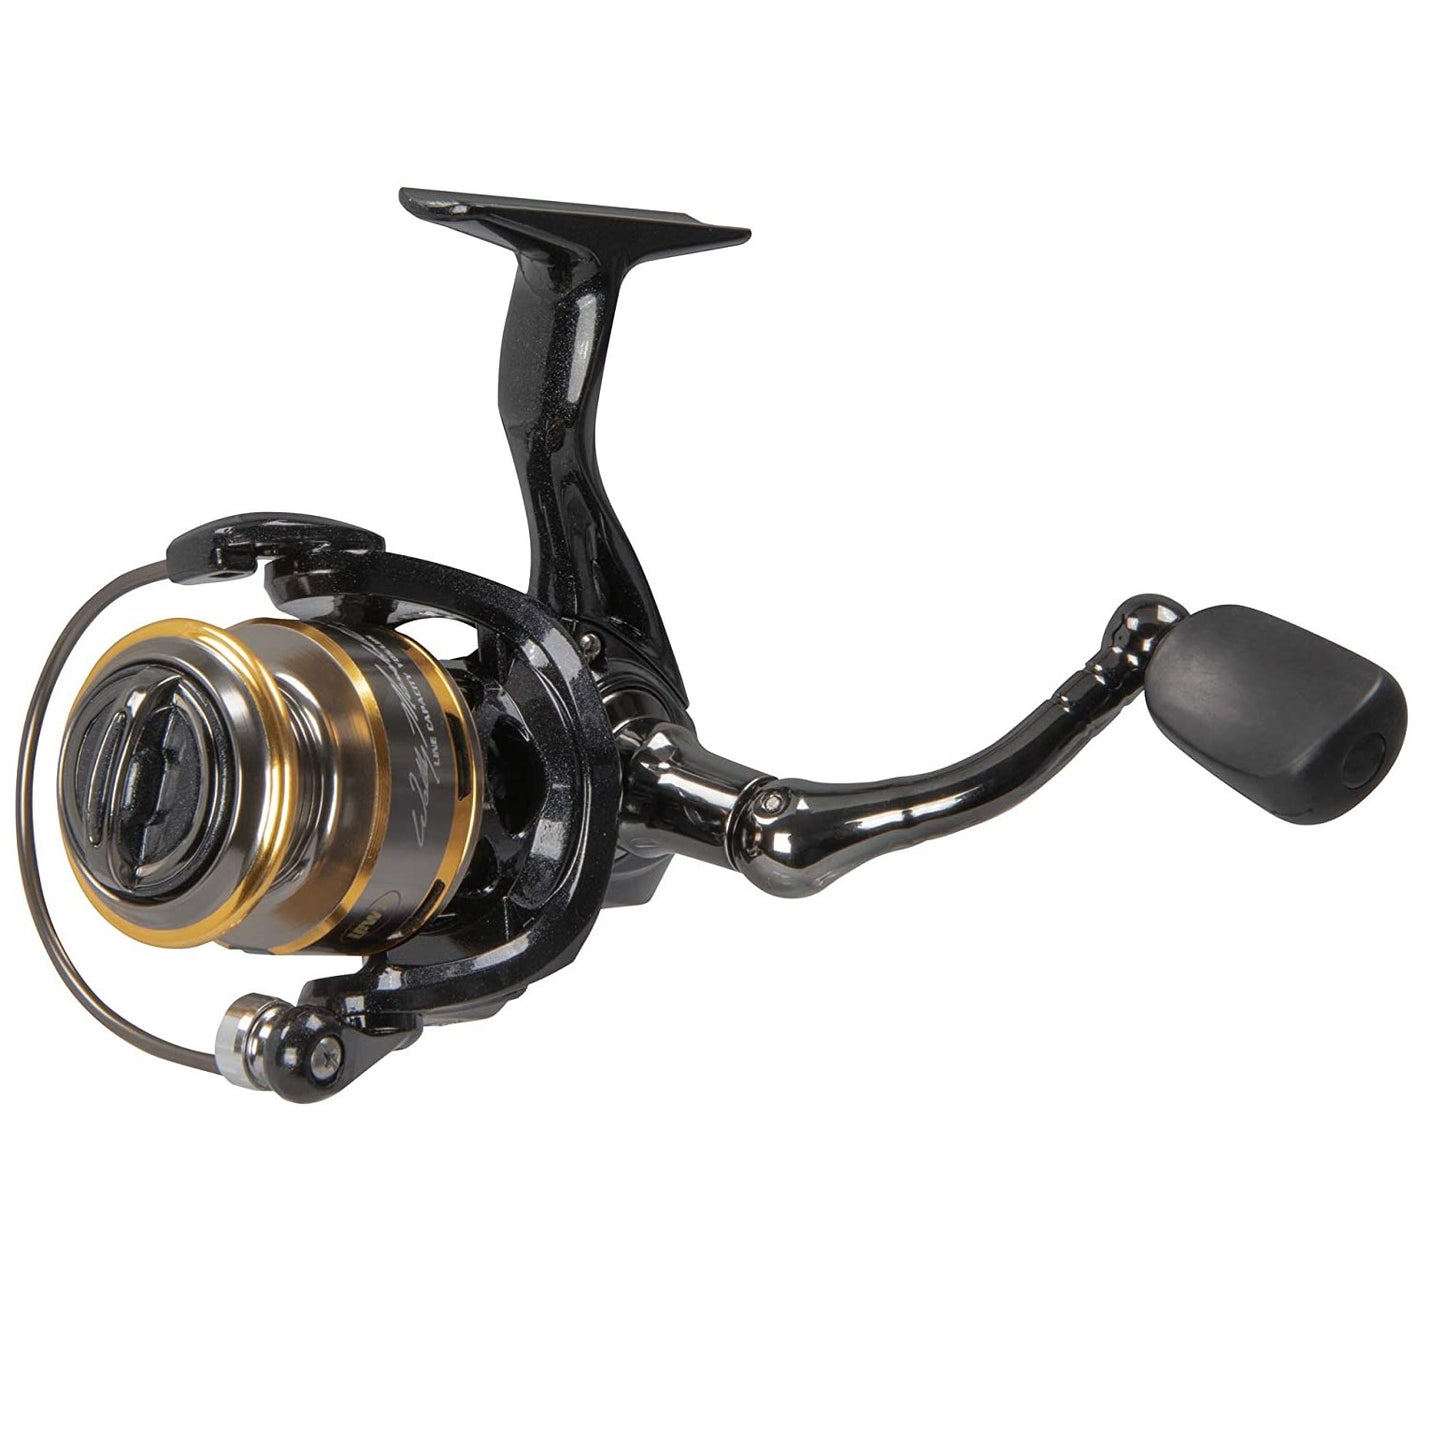 Lew's Wally Marshall Signature WSP100 Spinning Reel 5+1 5.1:1 / 7.8oz